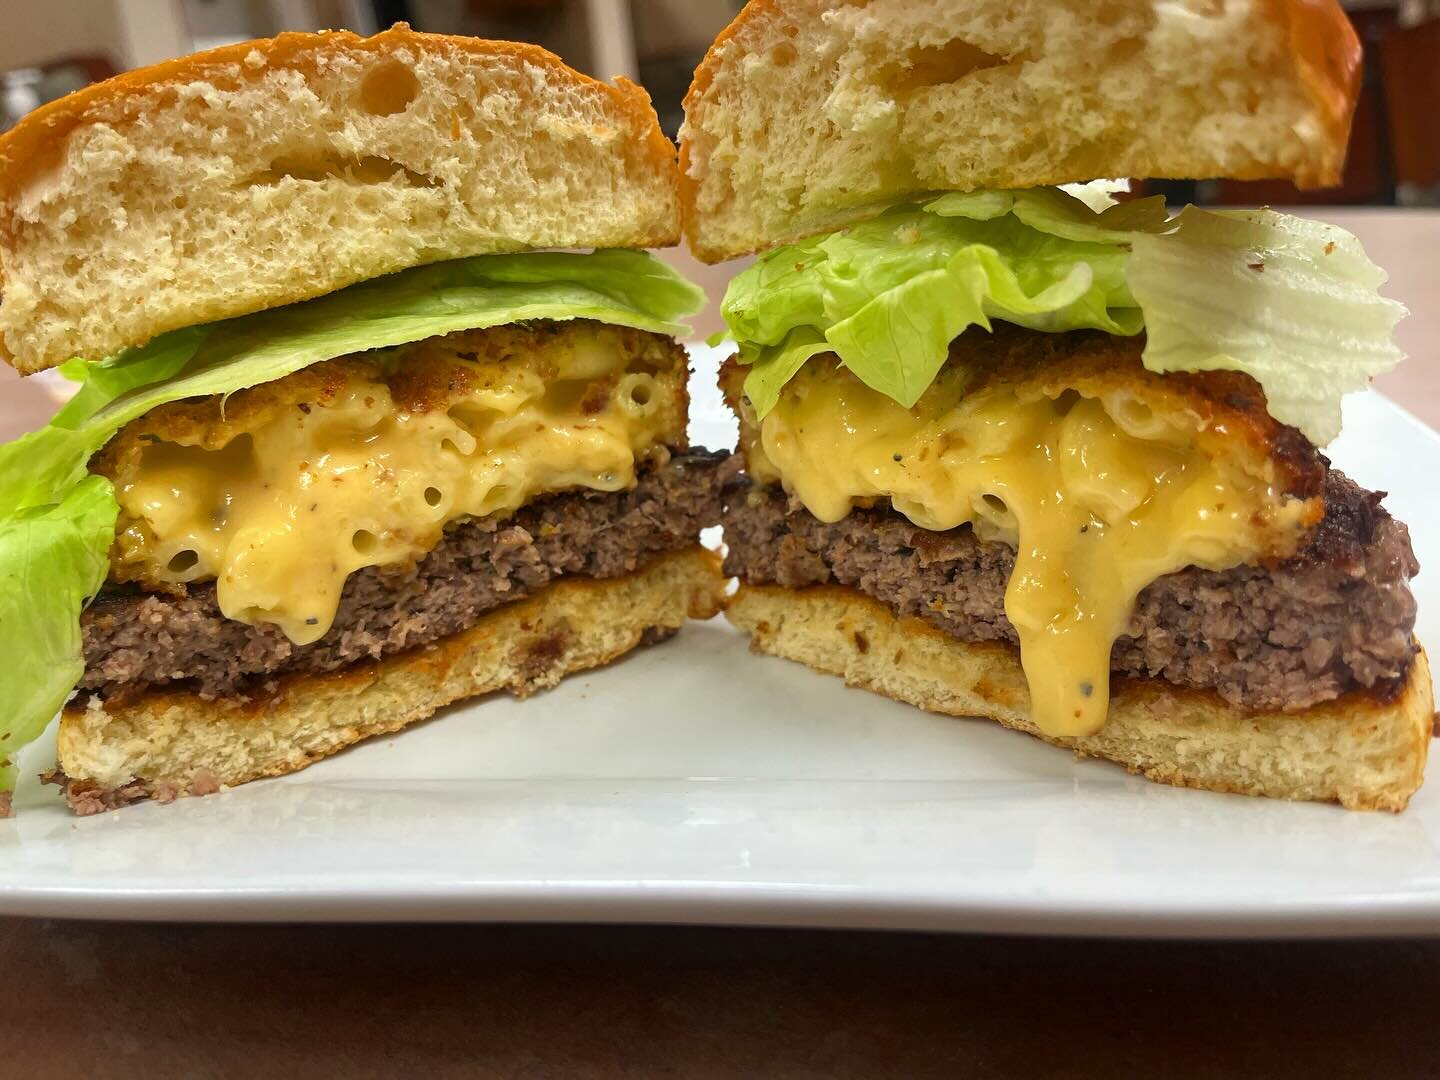 Don&rsquo;t be a noodle. Come try our Mac and cheese burger before it&rsquo;s too late!! #NoOtherDeli